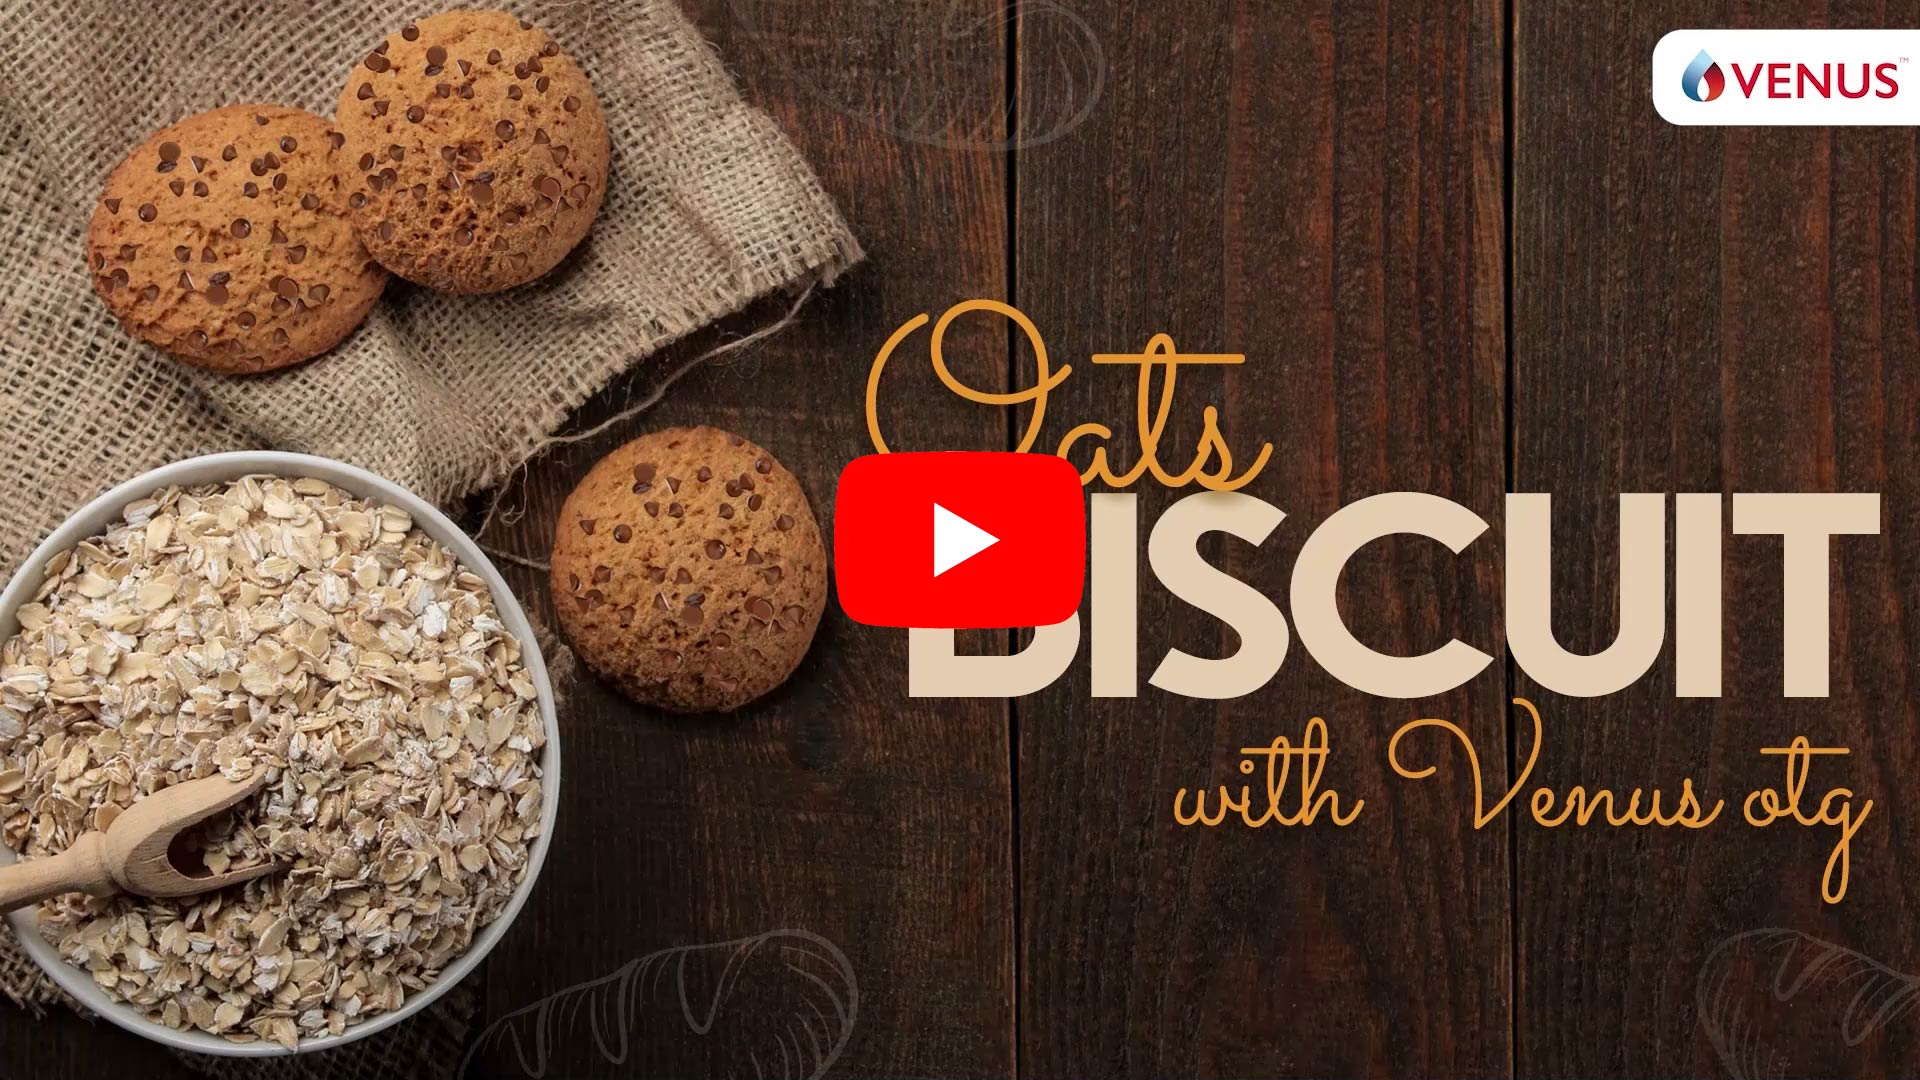 Otg-video-cover2-biscuit